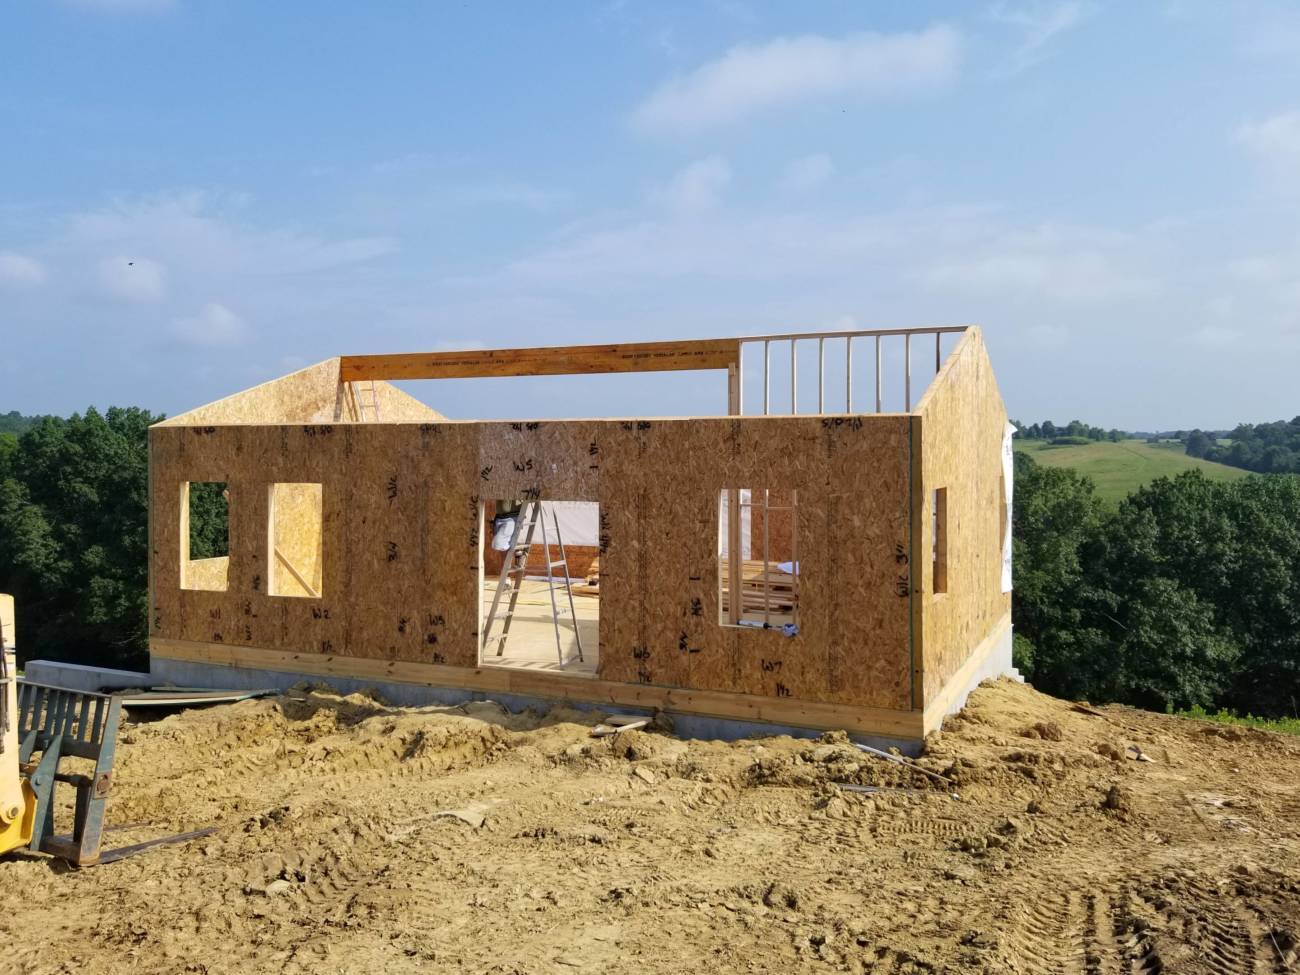 Photo of the front view of a ranch house under construction with rolling hills in the background